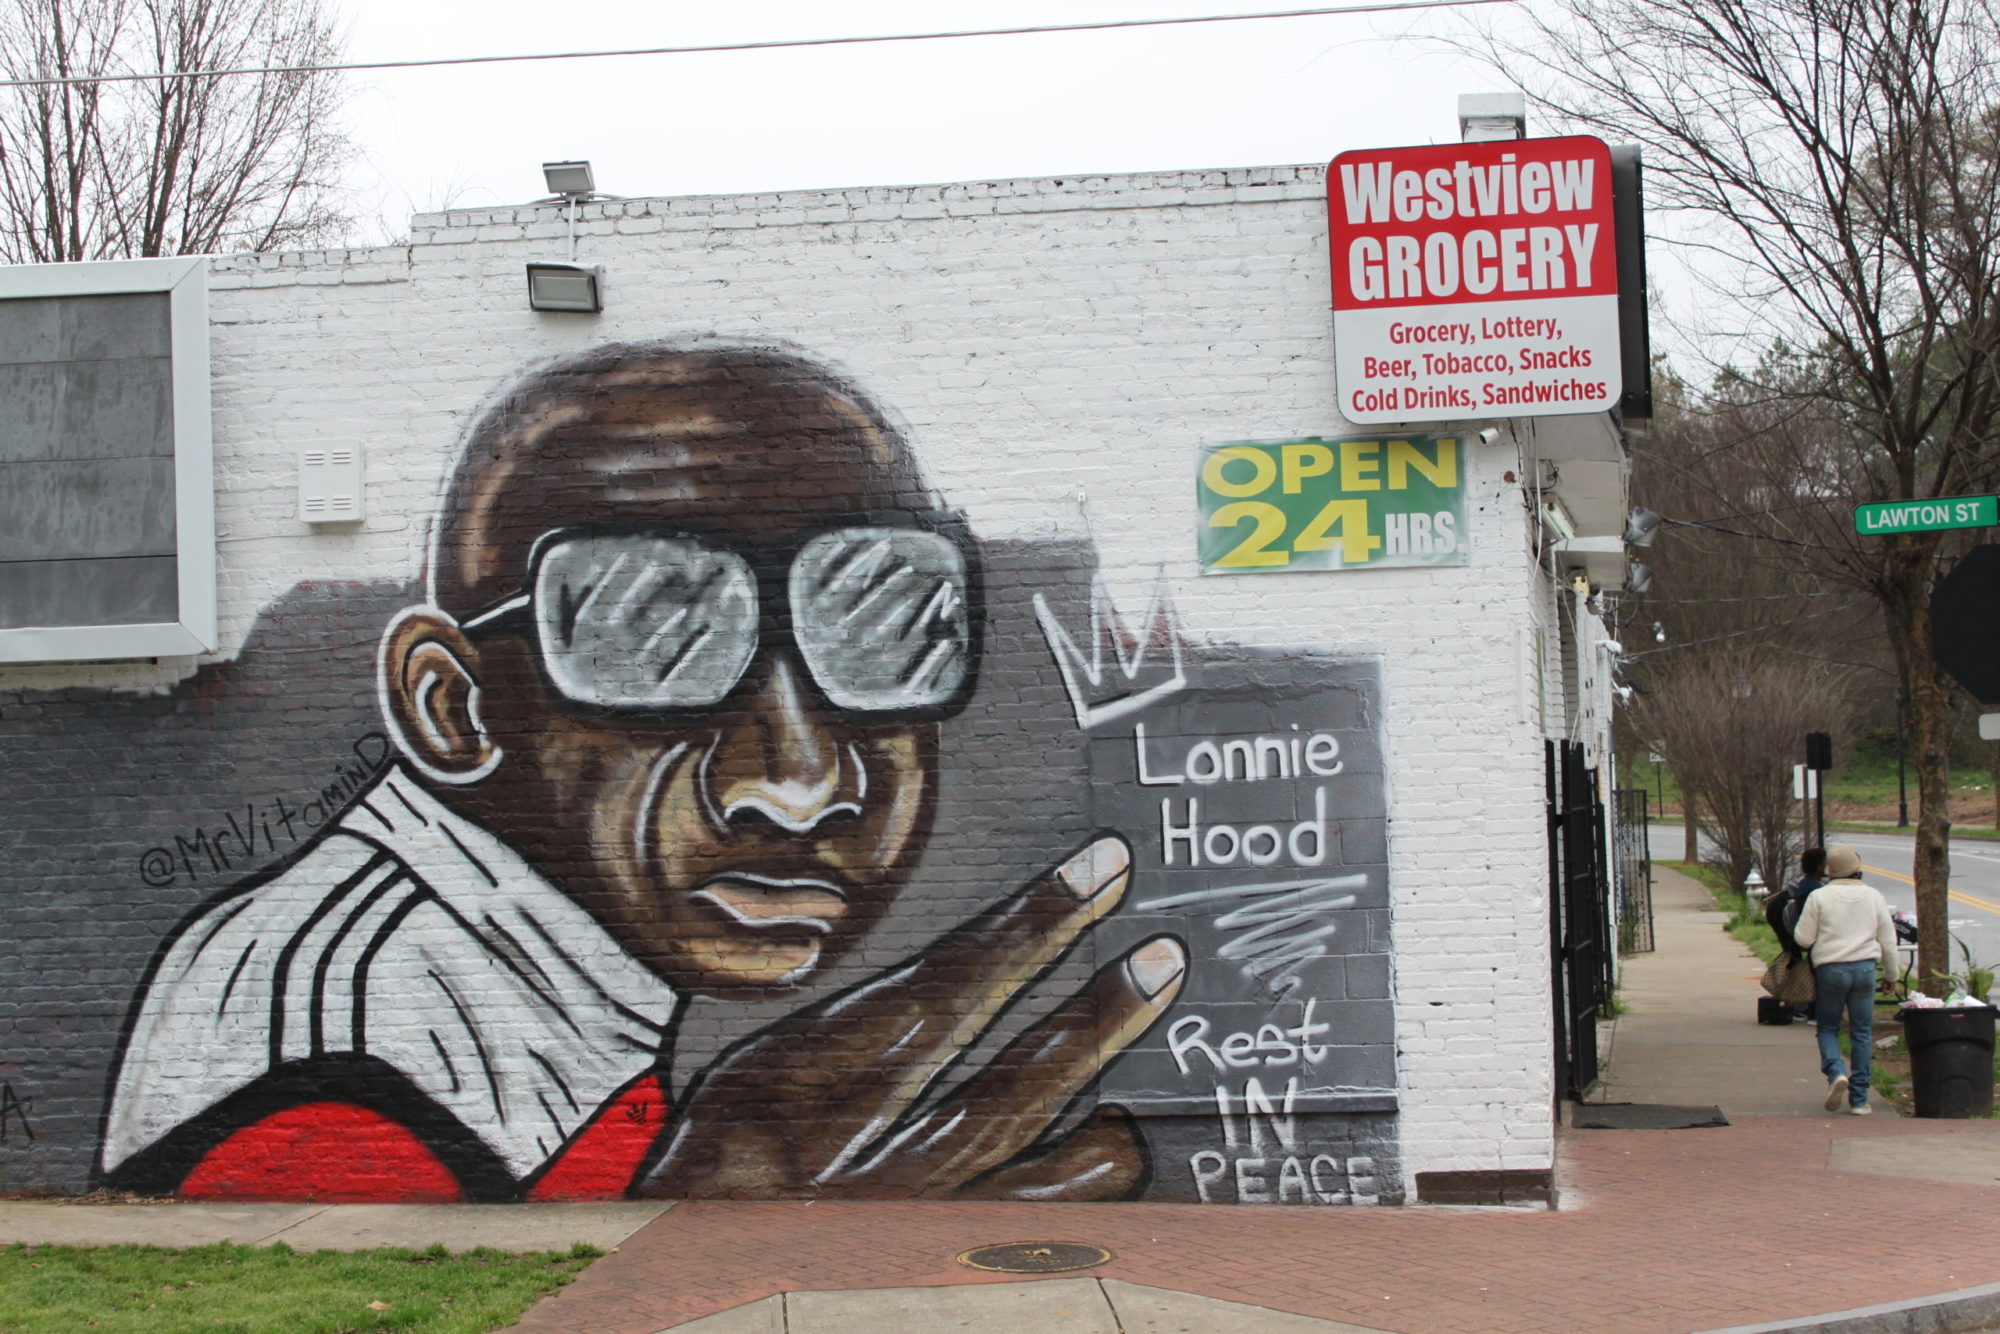 A mural on the side of a grocery store depicts a black person wearing sunglasses and holding aloft a hand. Text next to the mural reads 